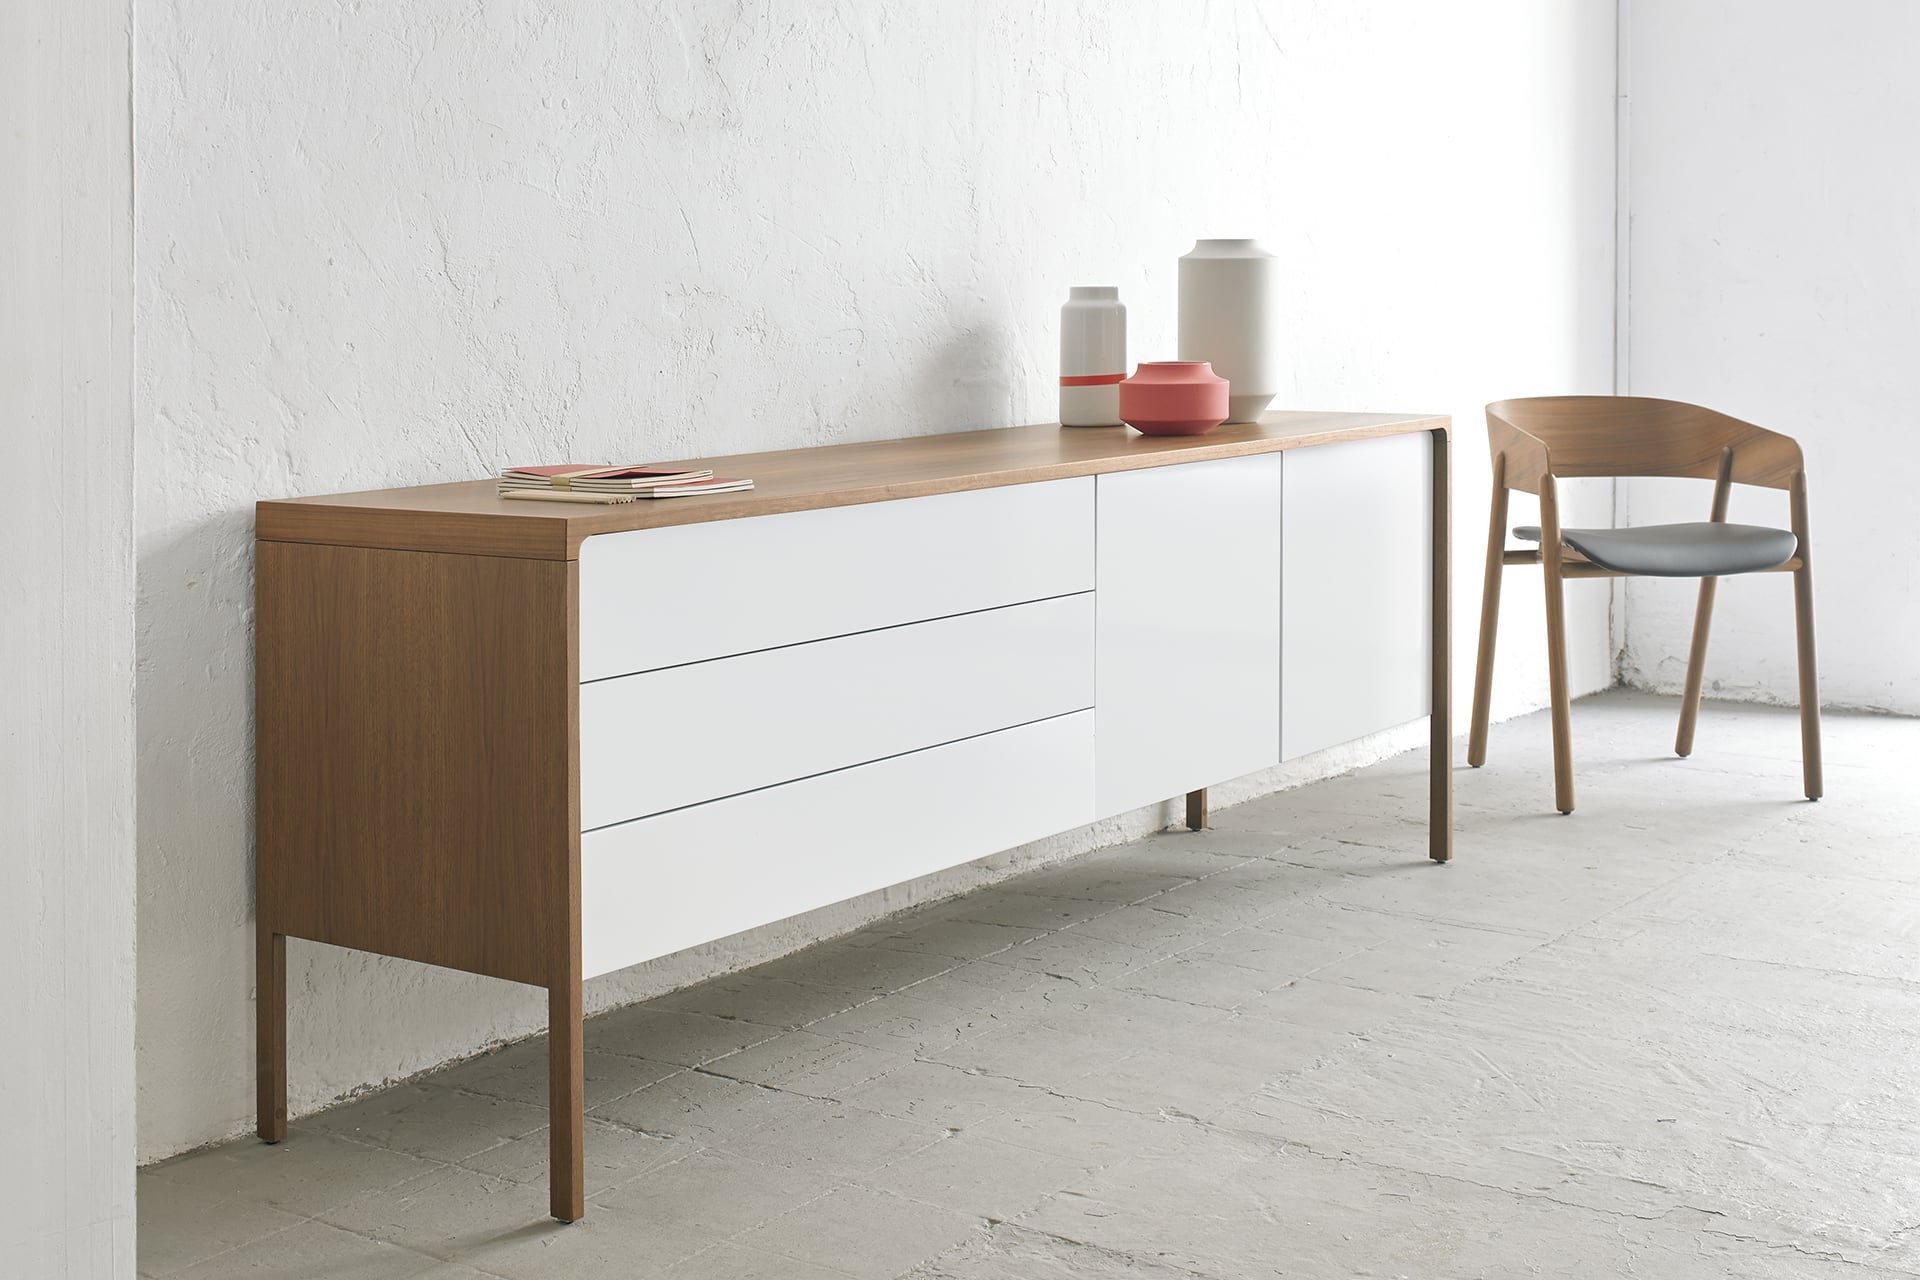 Tactile Sideboard from Punt Mobles, designed by Terence Woodgate